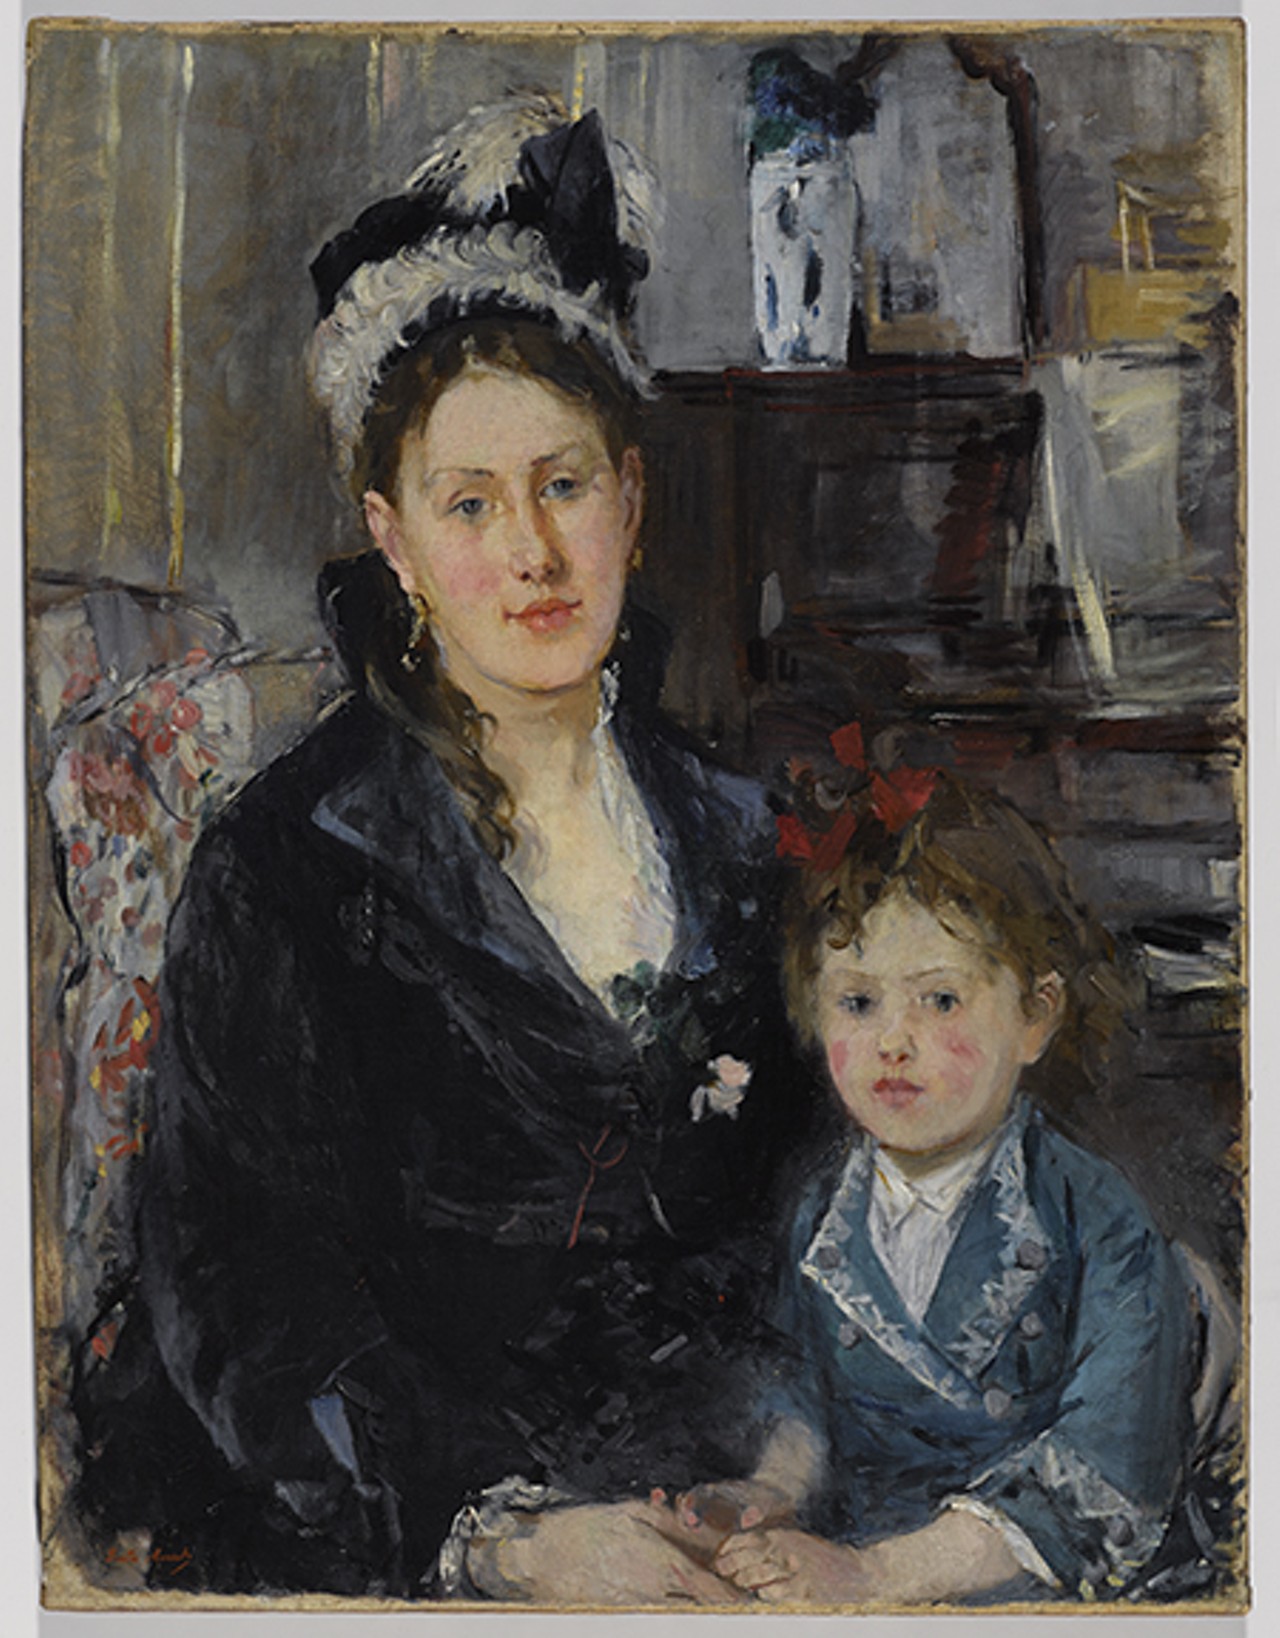 Berthe Morisot (French, 1841&#150;1895). Madame Boursier and Her Daughter, circa 1873. Oil on canvas, 29 5/16 x 22 3/8 in. (74.5 x 56.8 cm). Brooklyn Museum, Museum Collection Fund, 29.30. (Photo: Sarah DeSantis, Brooklyn Museum)